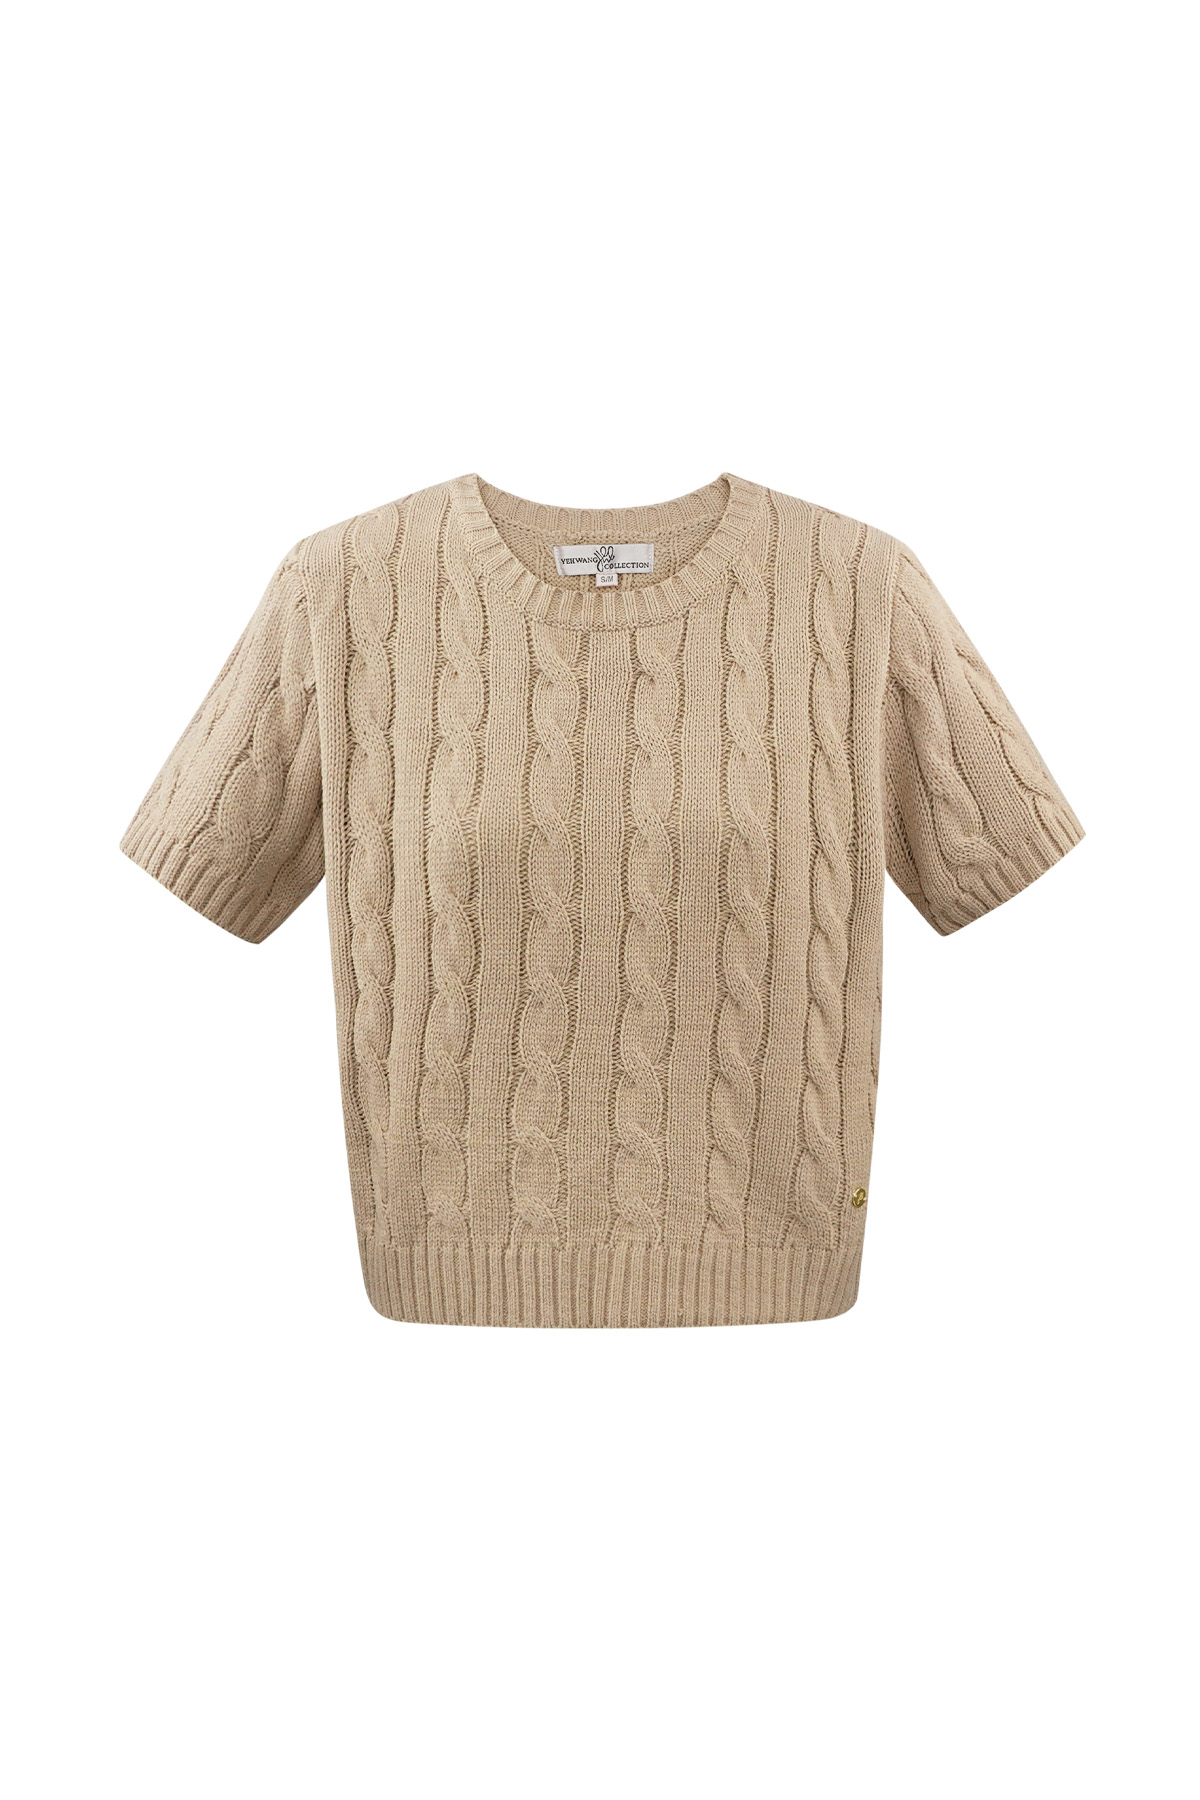 Classic knitted sweater with cables and short sleeves small/medium – beige